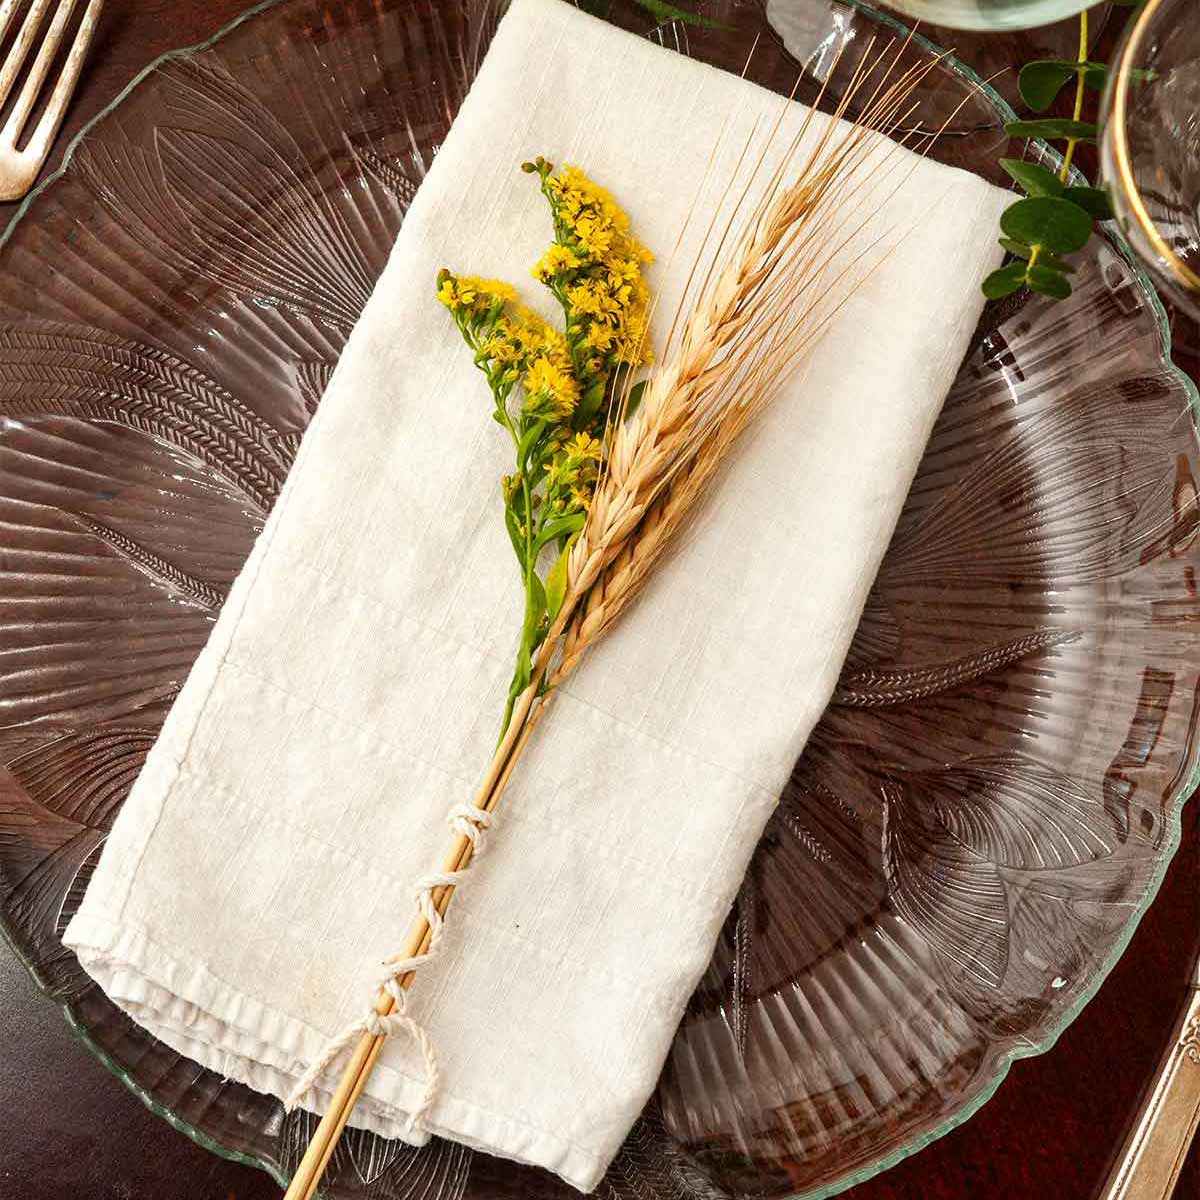 A small bundle of goldenrod and wheat on a napkin on a plate on a table with glasses.